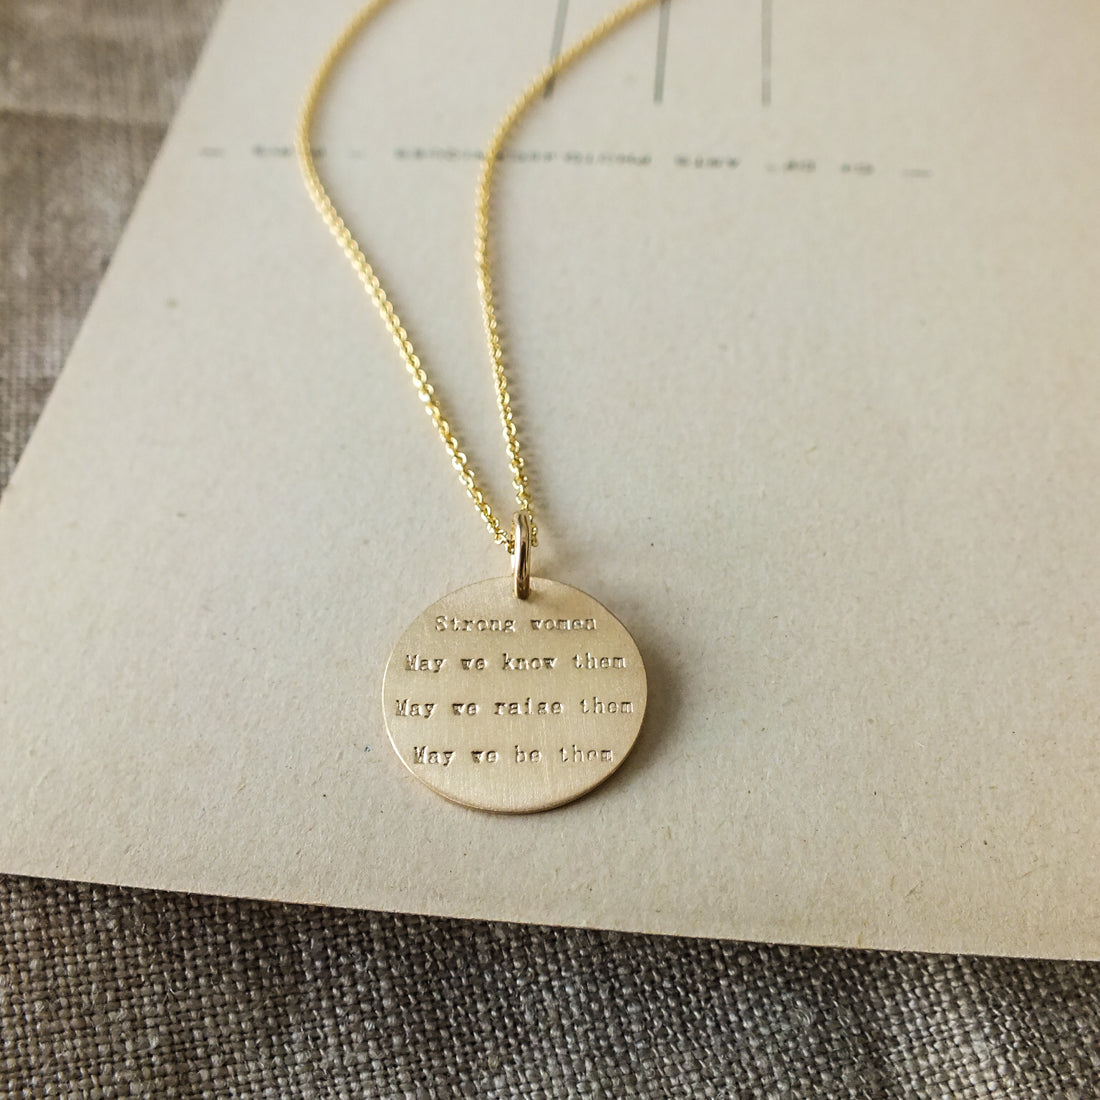 Becoming Jewelry's Strong Women Necklace is a sterling silver charm necklace with an engraved inspirational quote for strong women on a beige background.